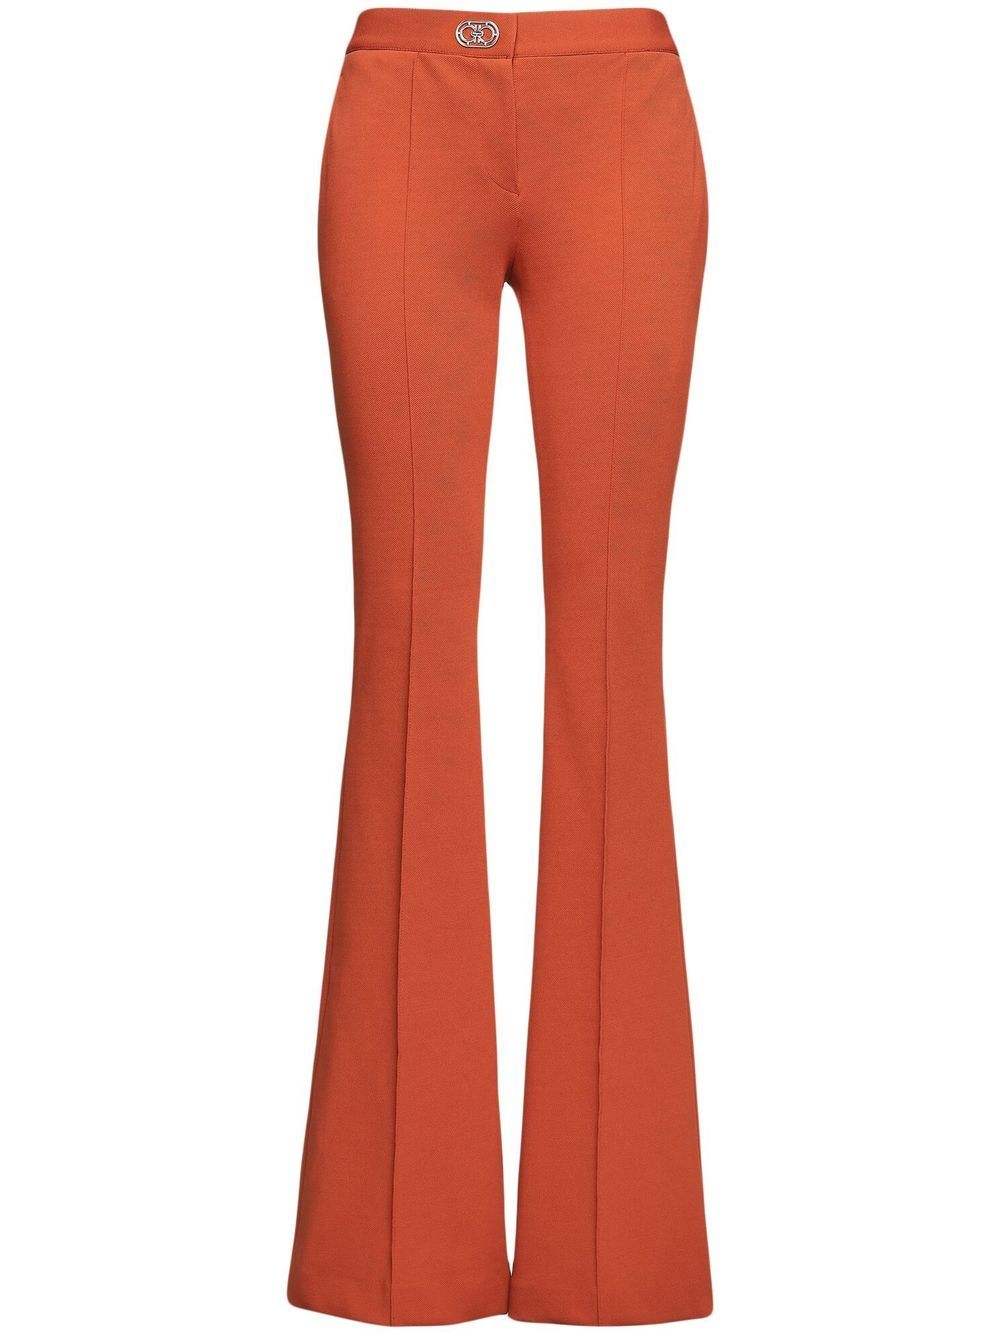 Gancini-button flared trousers